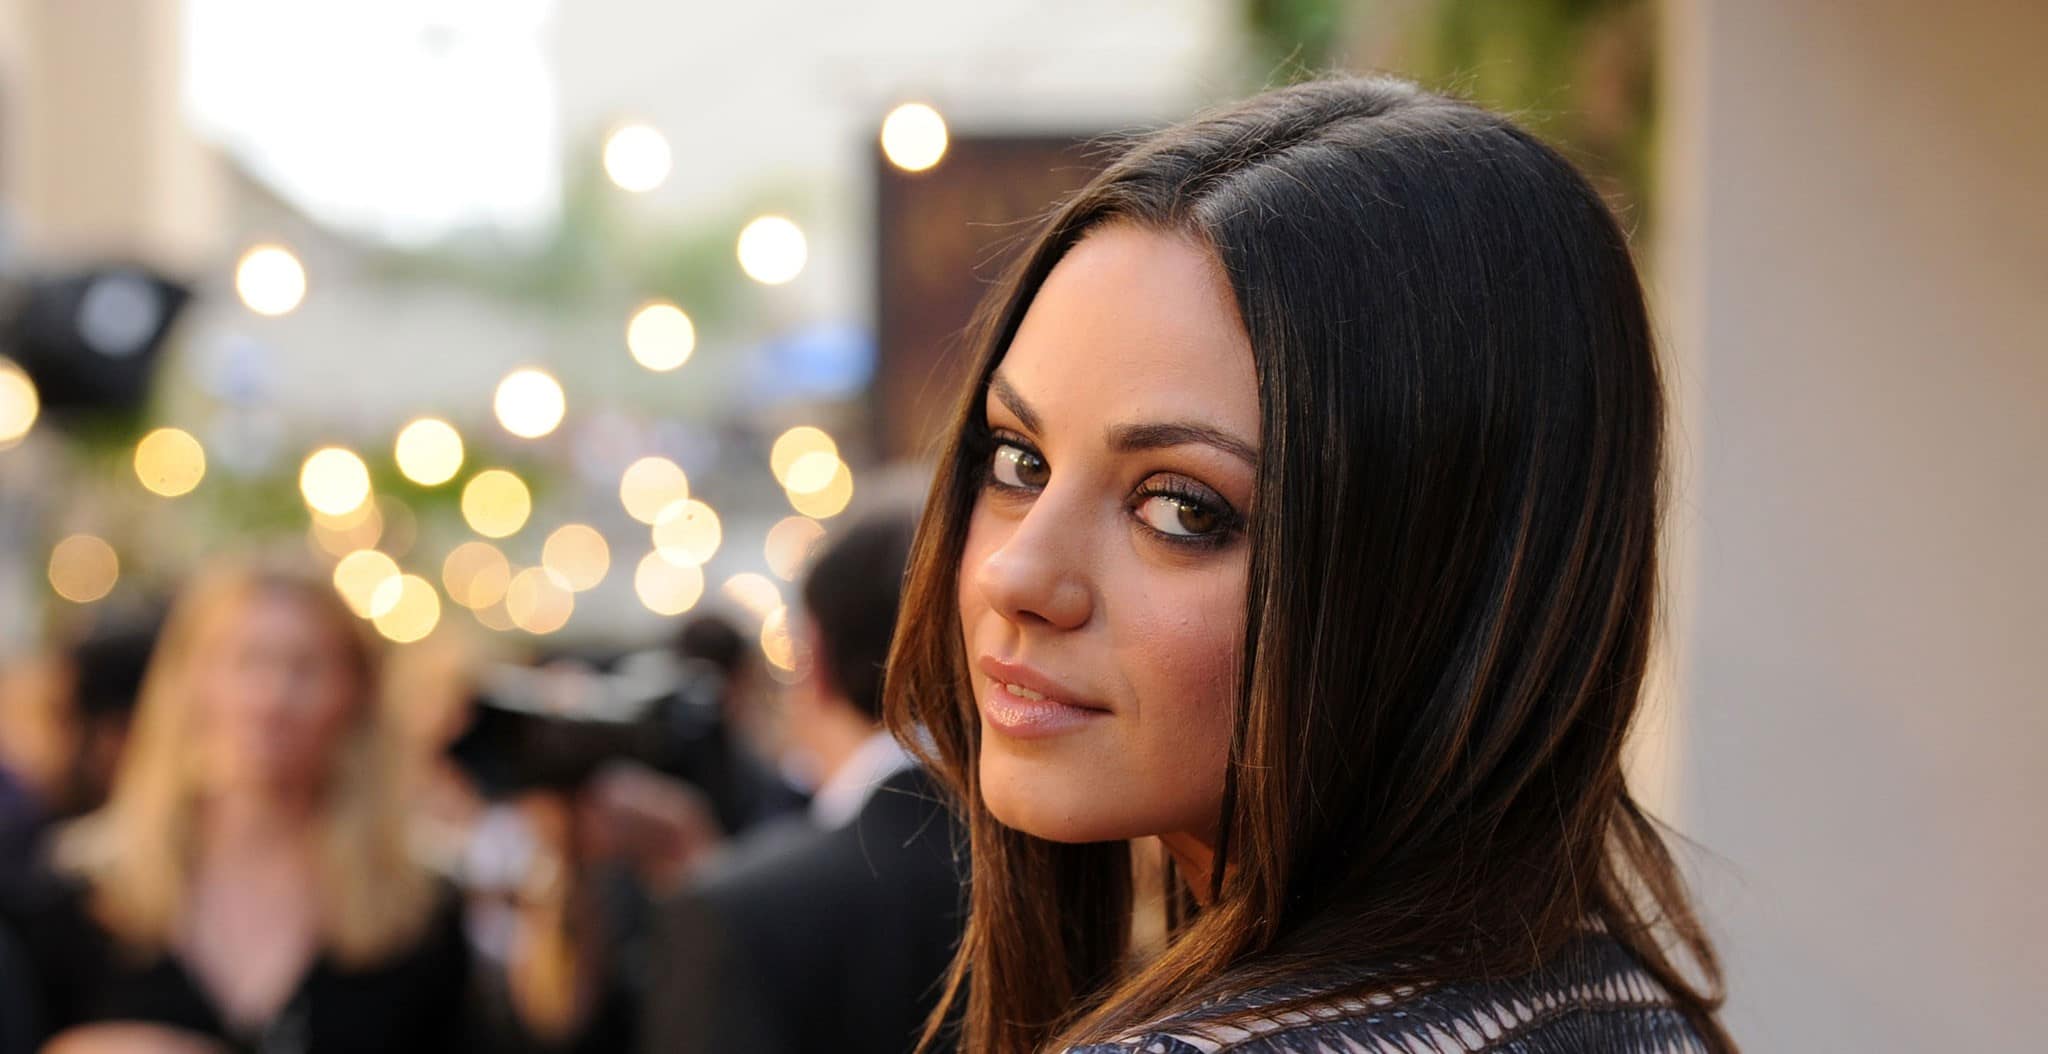 Mila Kunis looking back at the camera with lights in the background